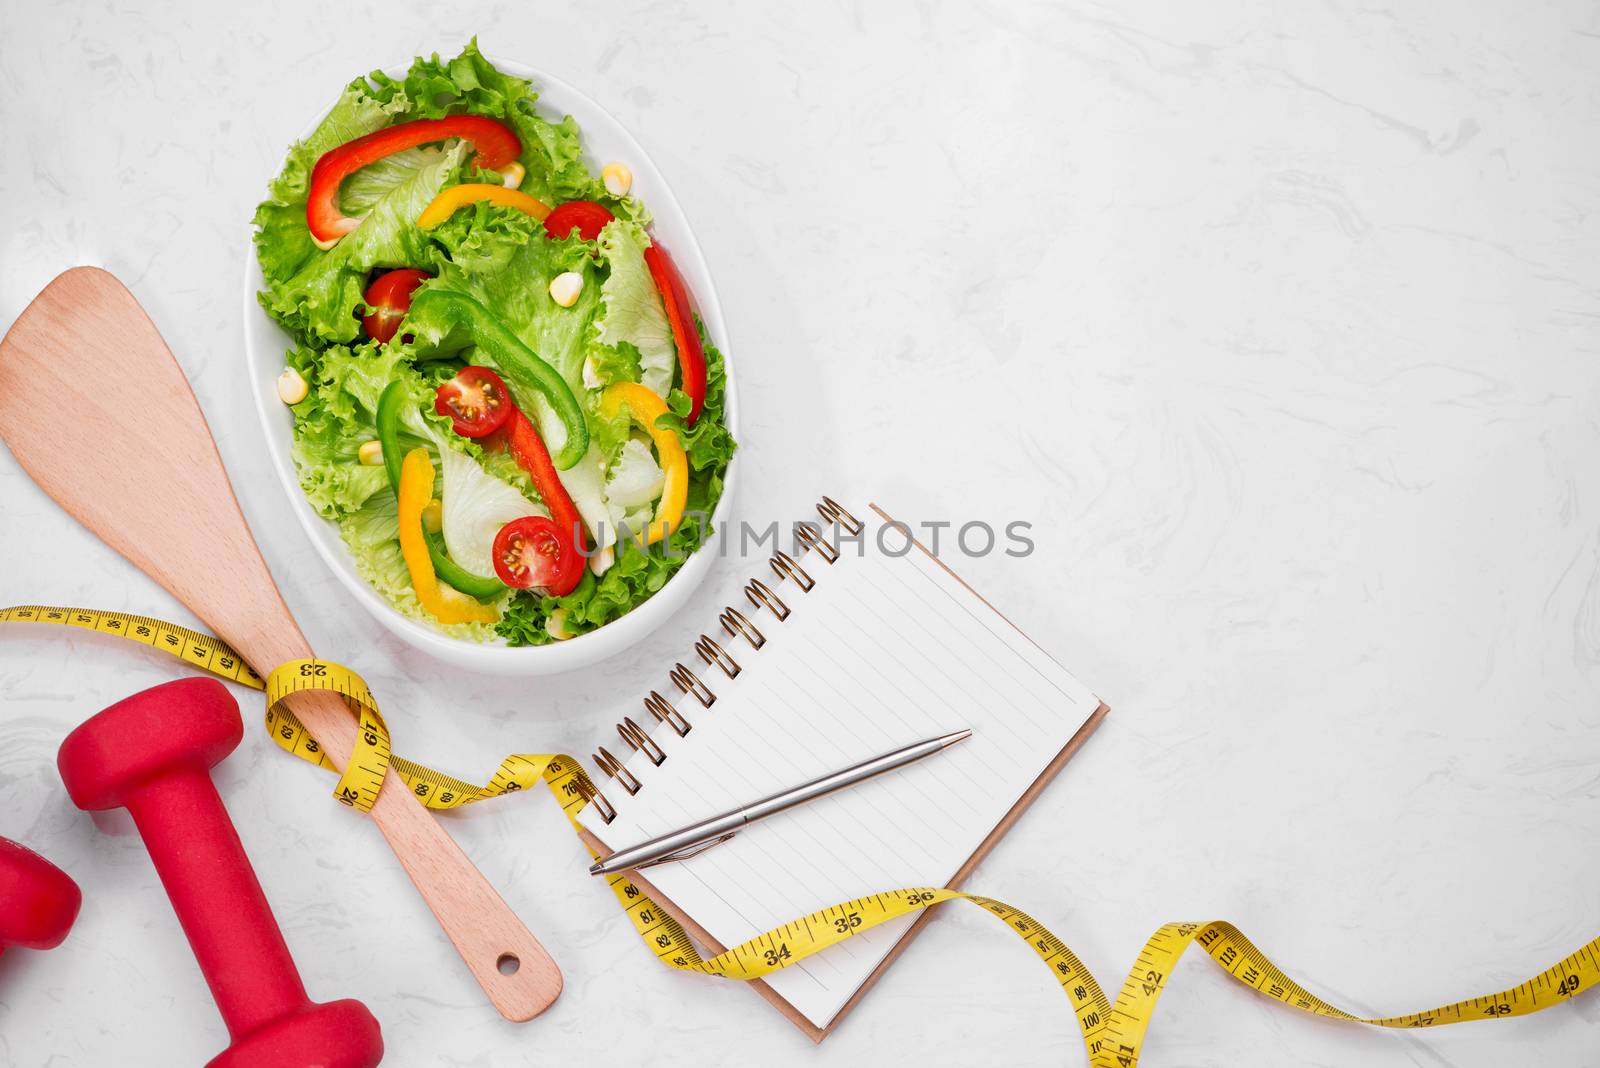 Healthy fitness meal with fresh salad. Diet concept.